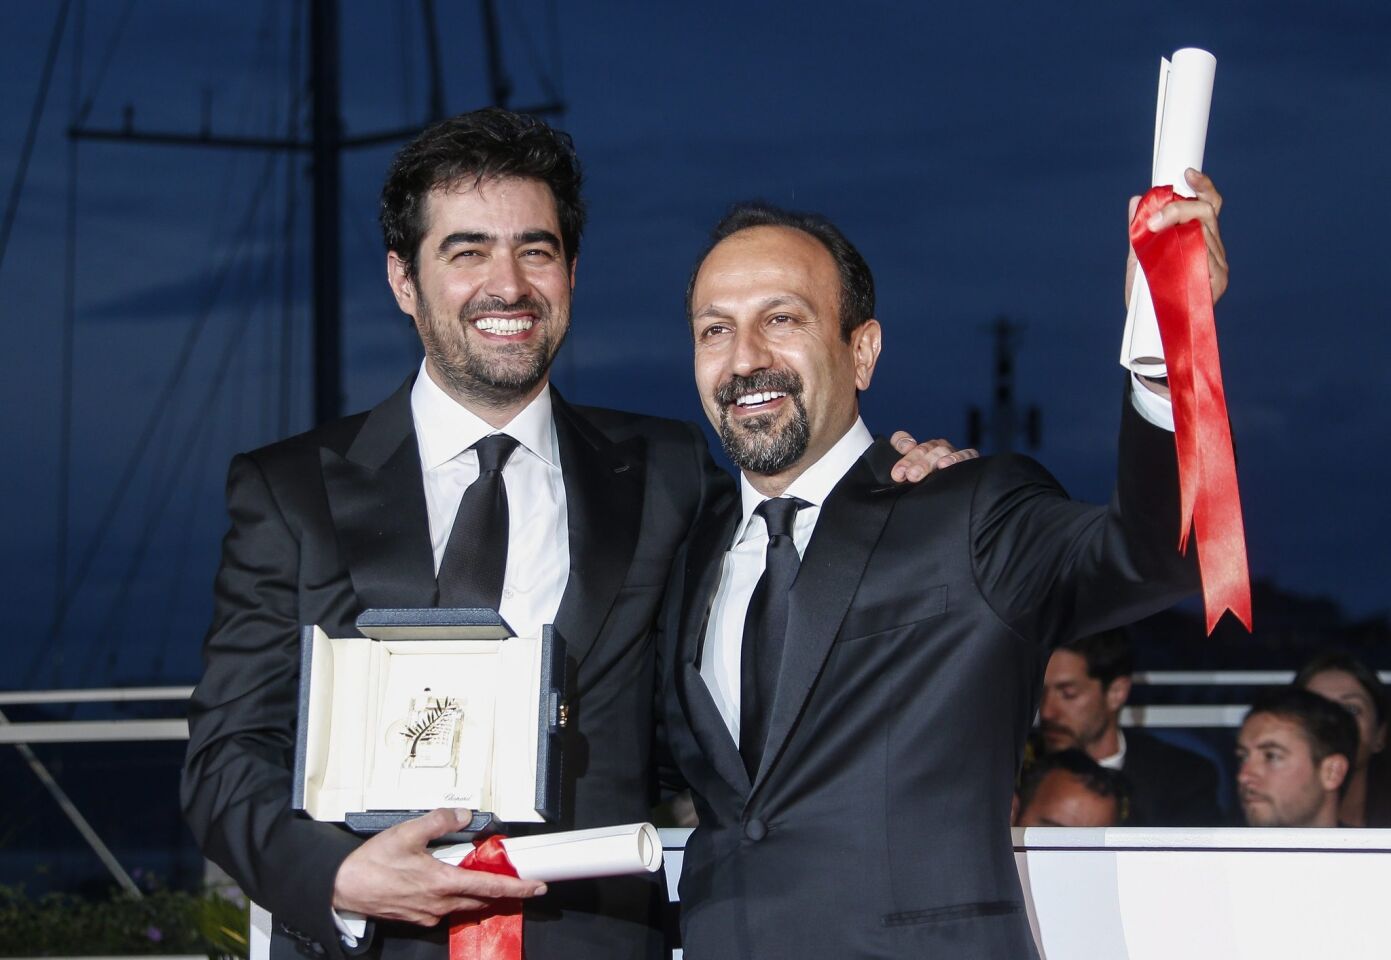 Cannes 2016 - 'The Salesman' awards